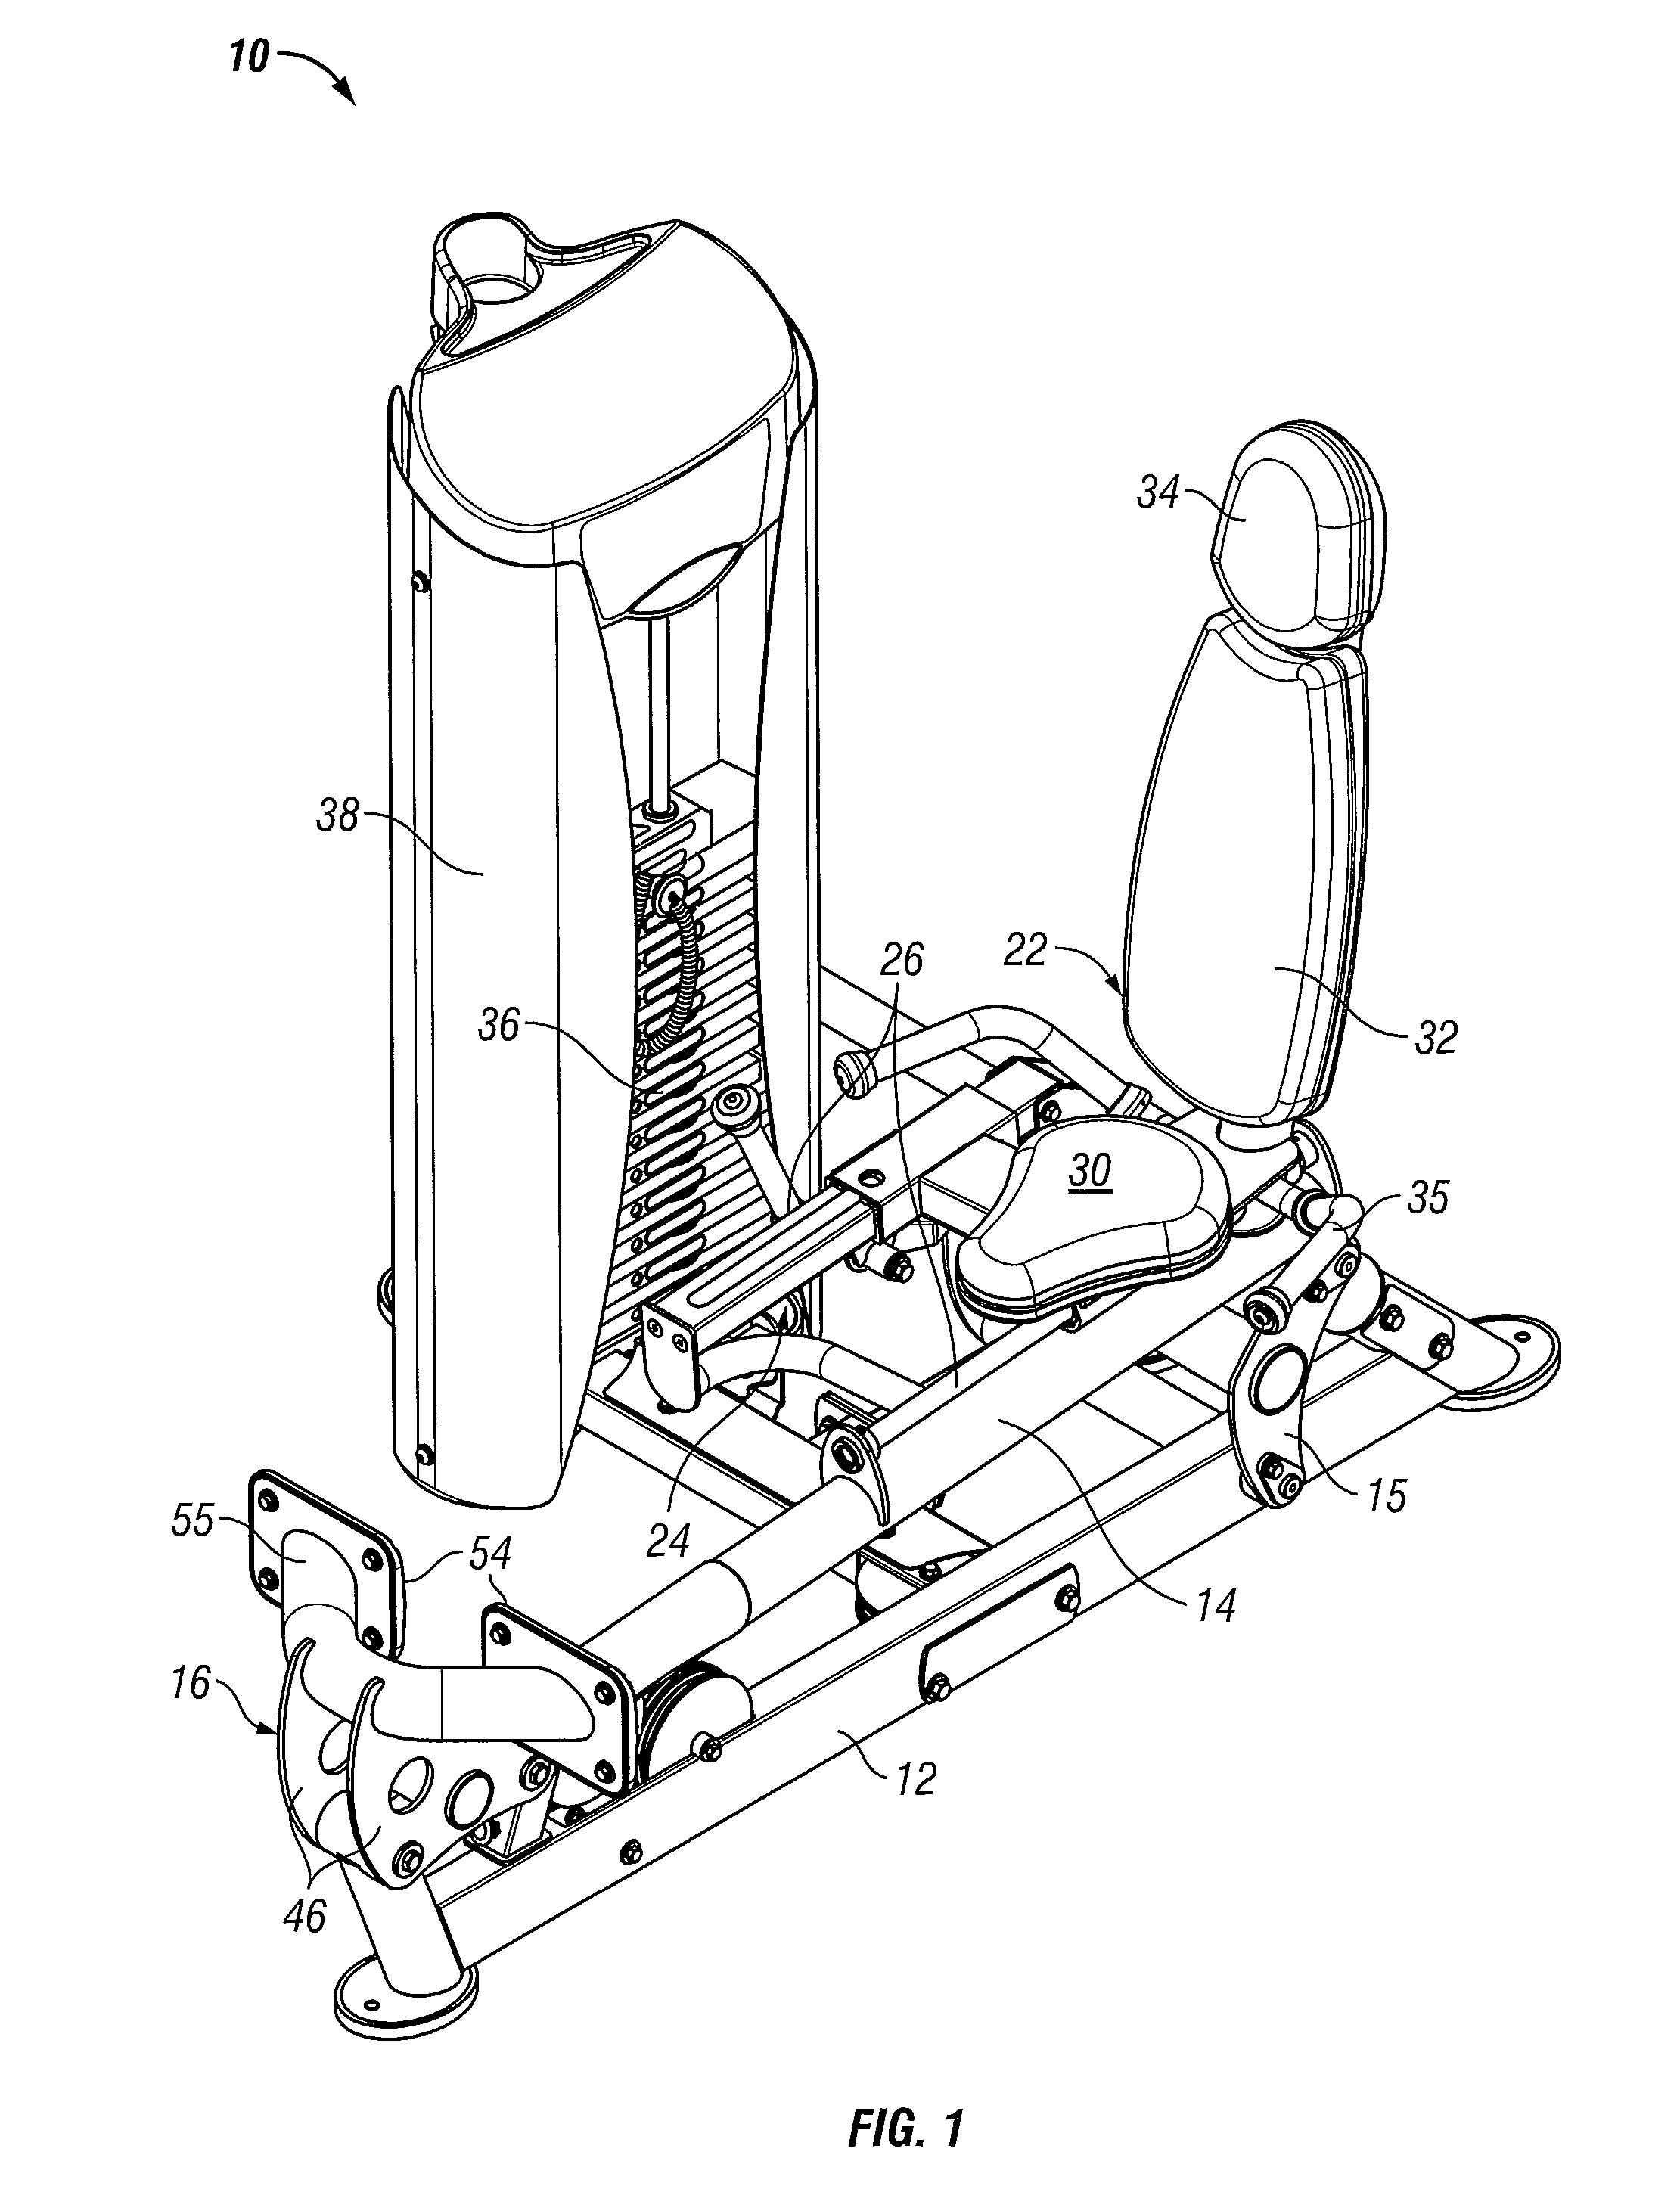 Calf exercise machine with rocking user support